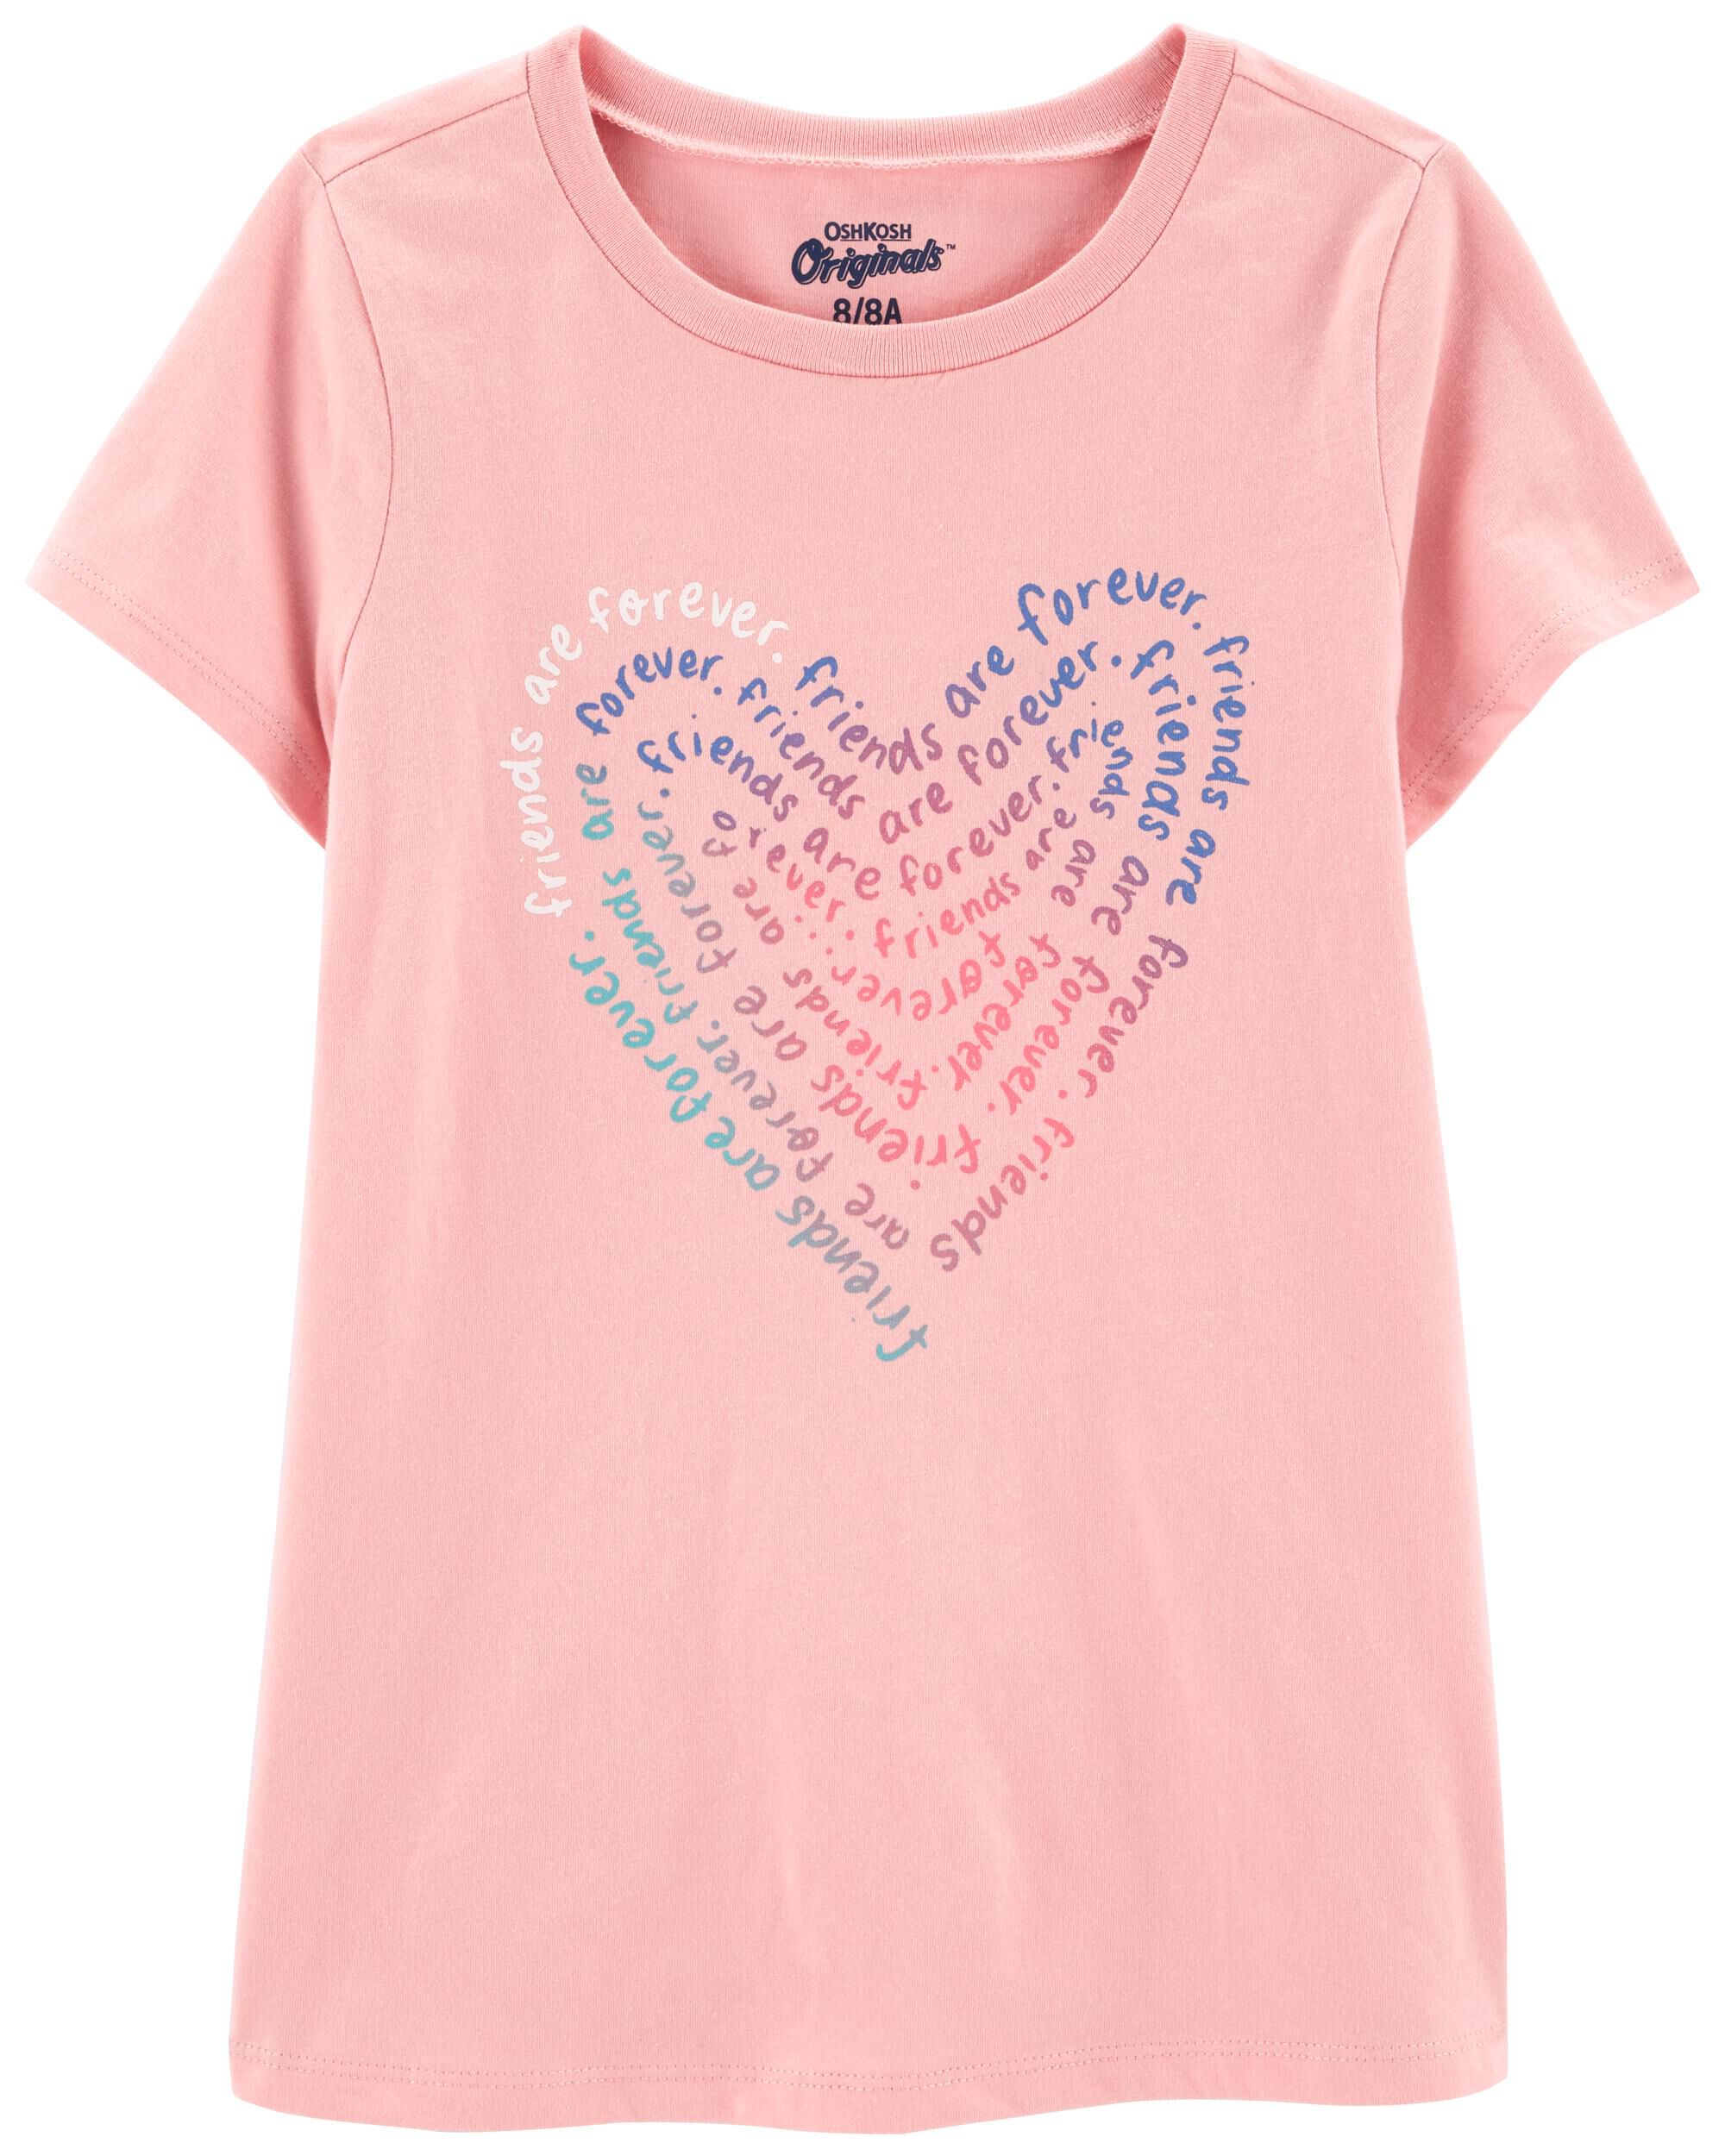 Details about   CARTER'S GIRLS SHIRT  SPARKLY LOVE HEART NEW WITH TAG 